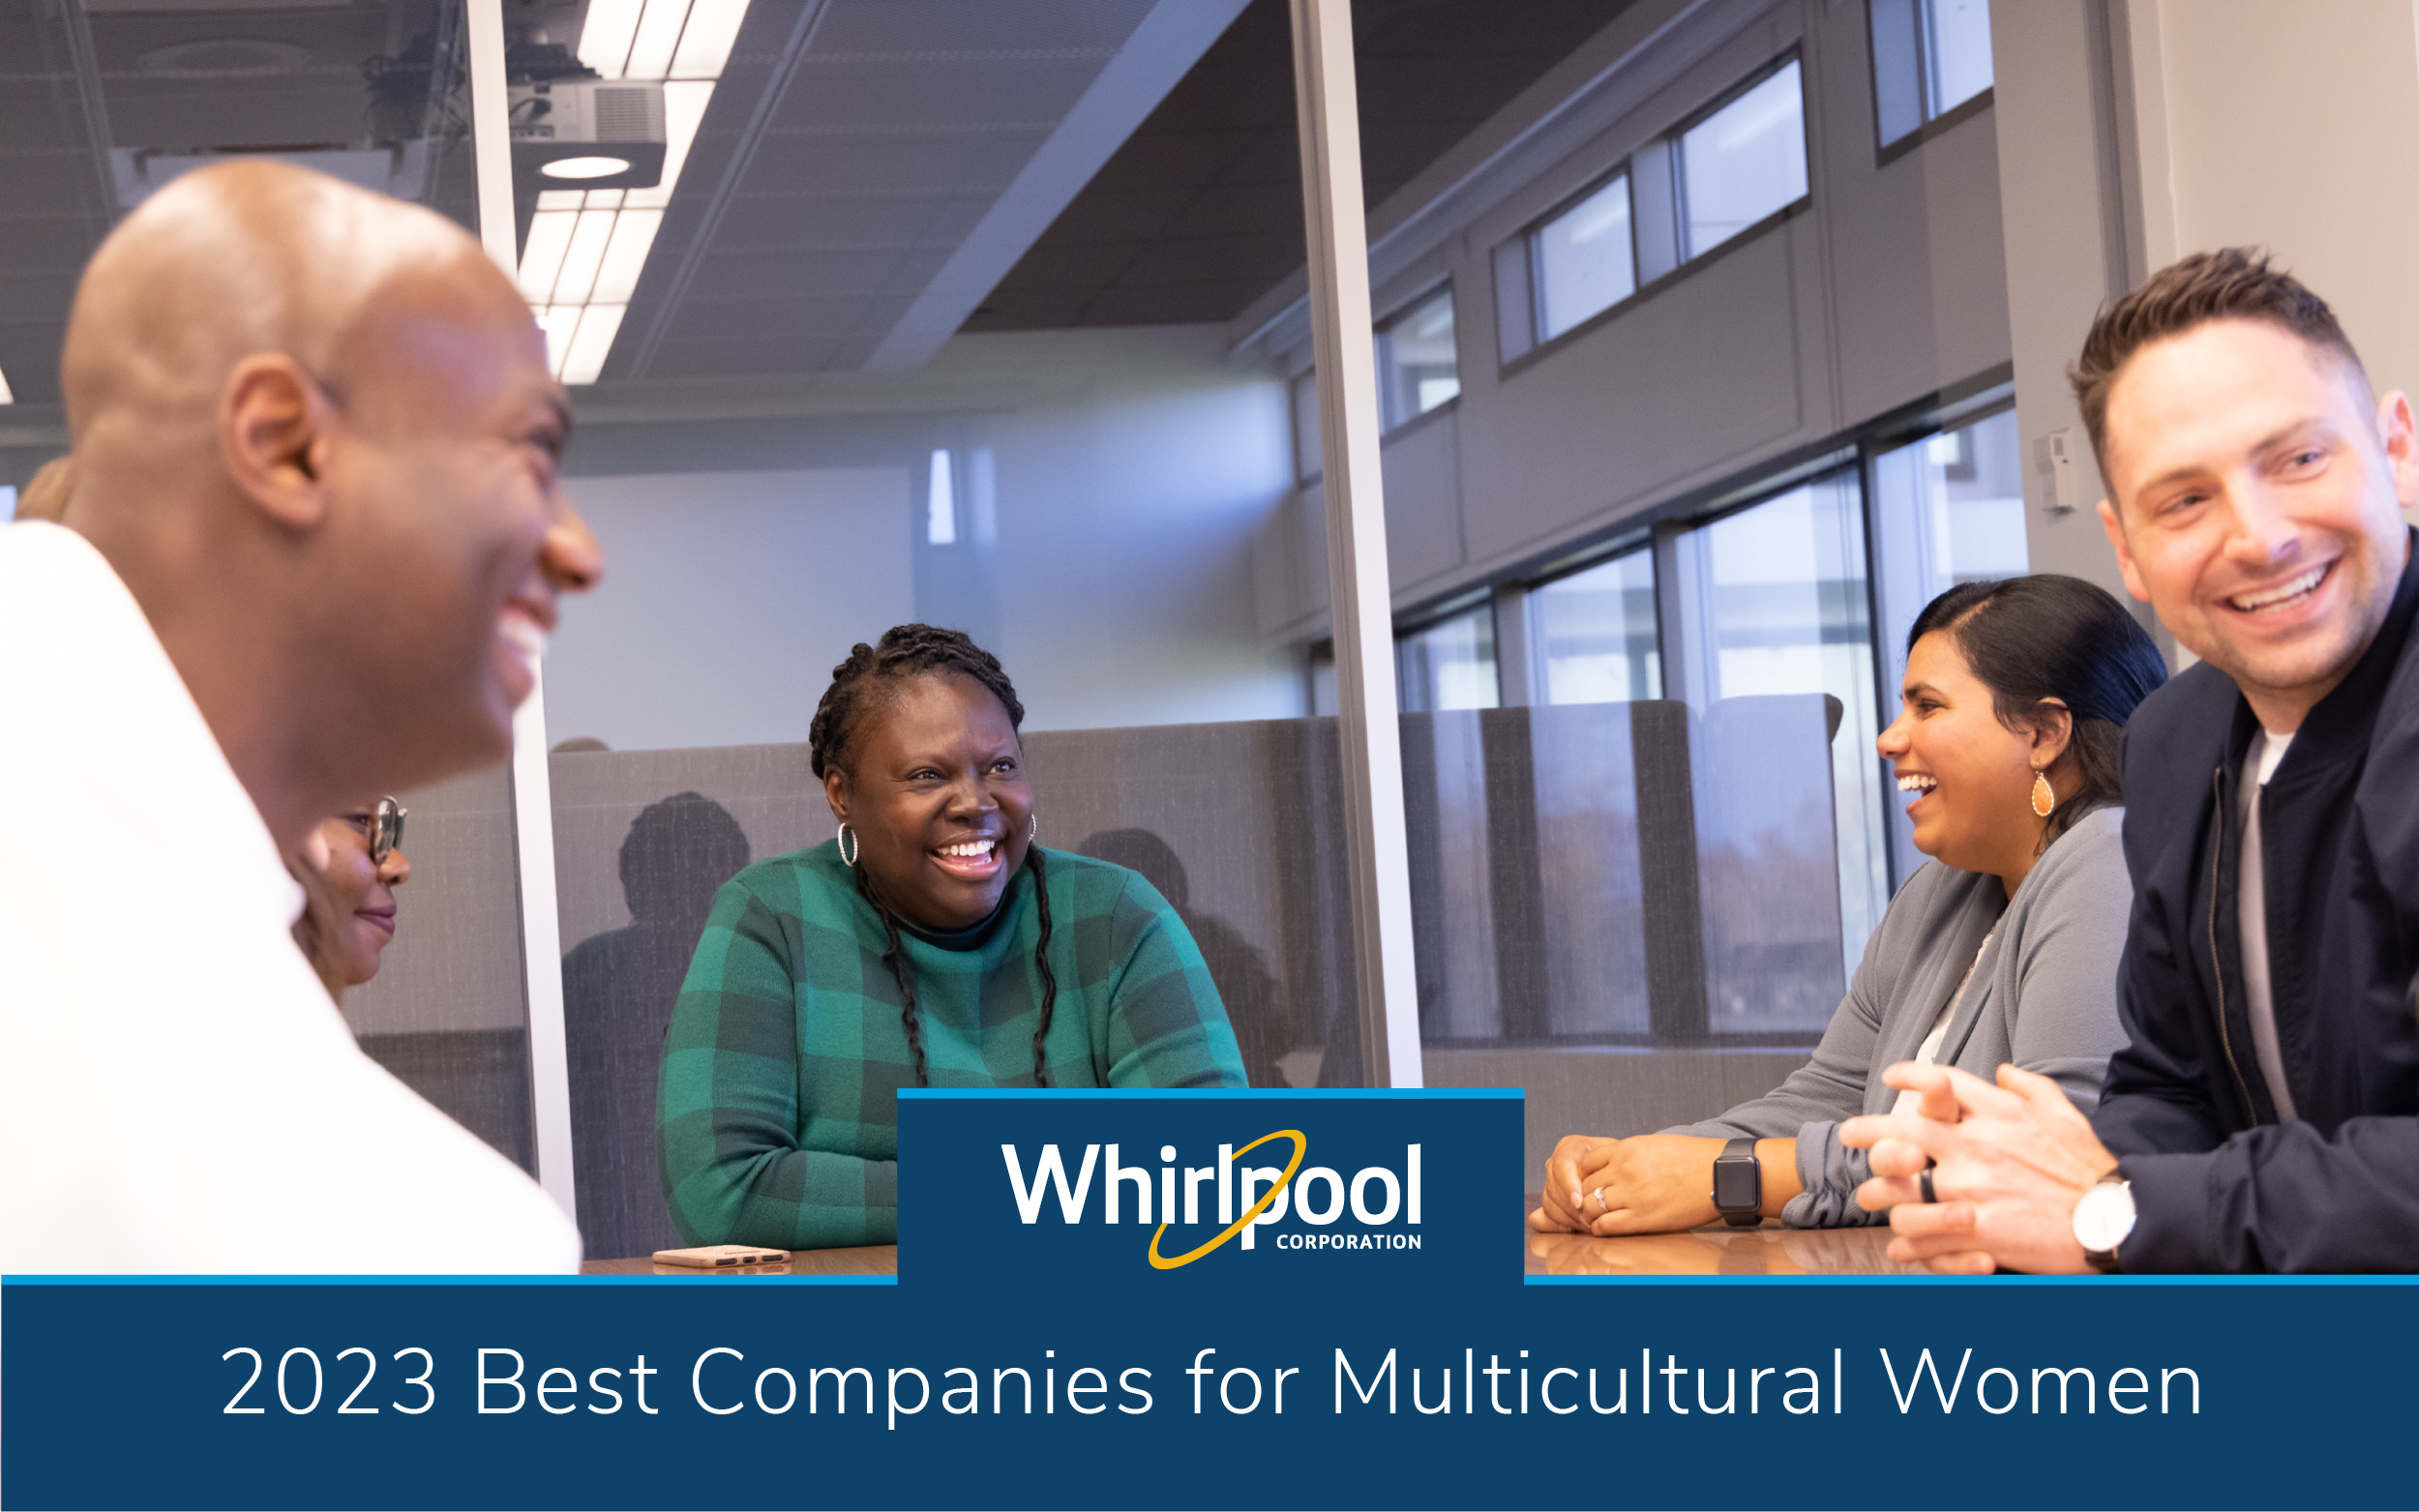 Group of multicultural employees in a conference room laughing and having fun